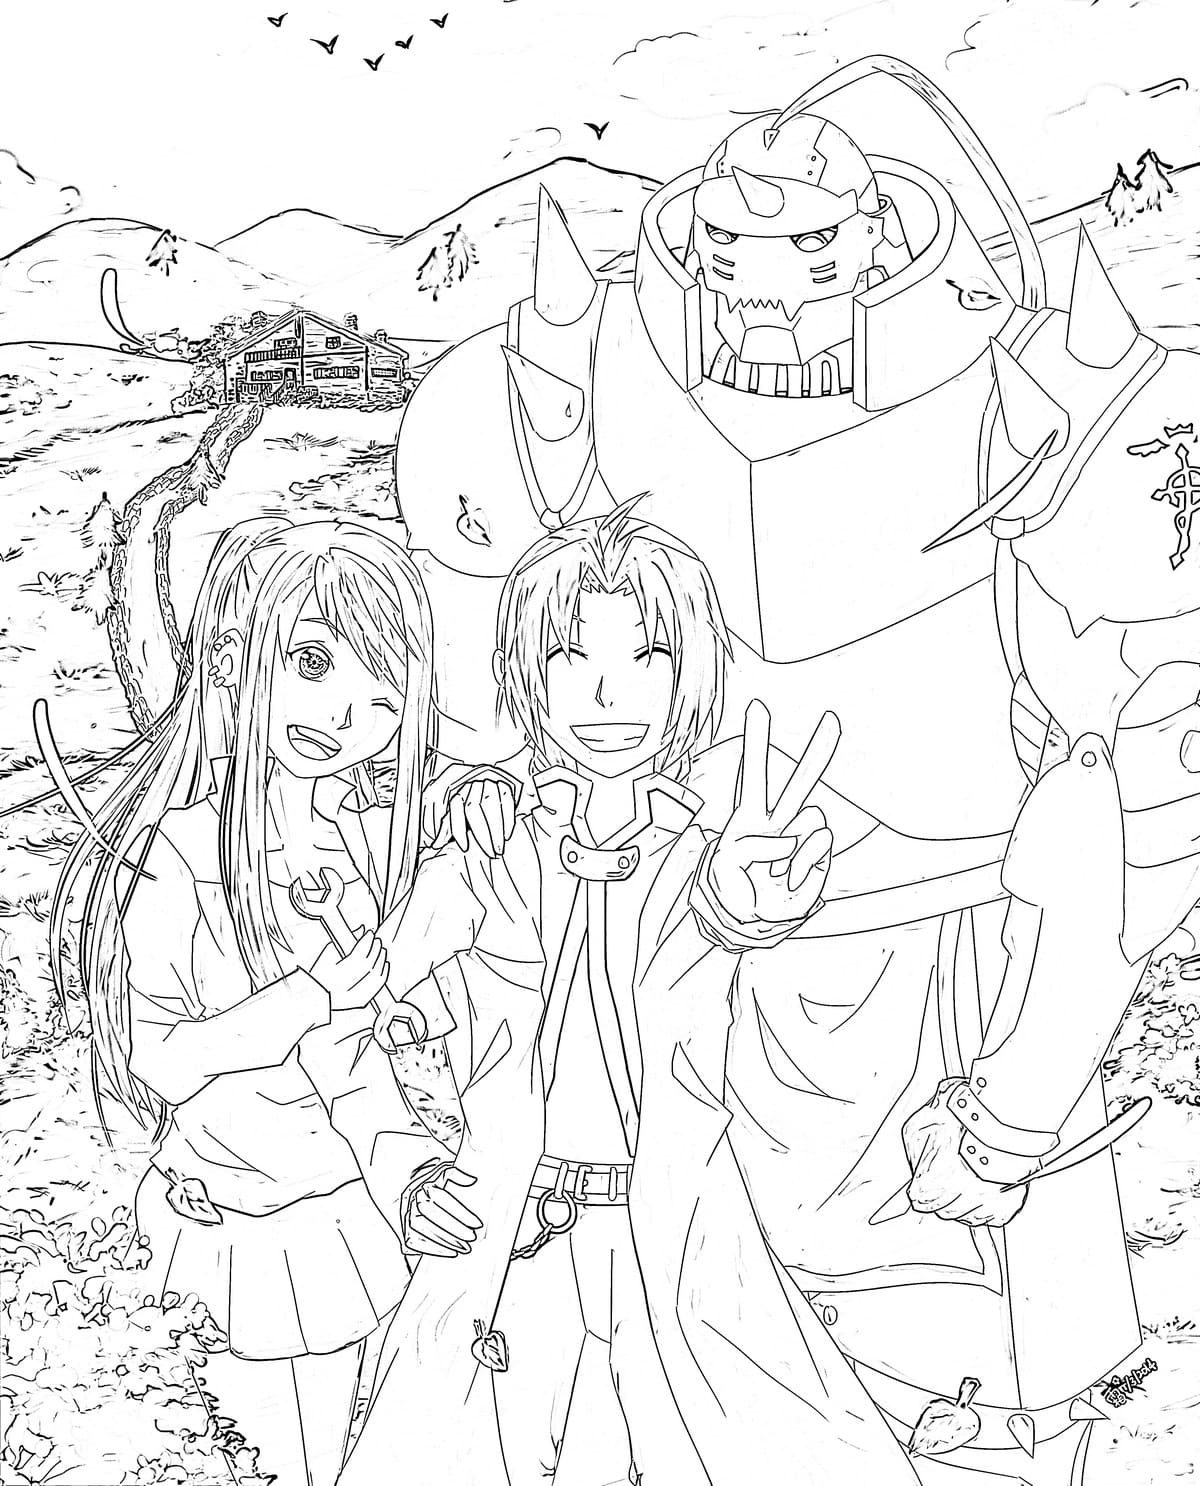 Free Full Metal Alchemist Coloring Page